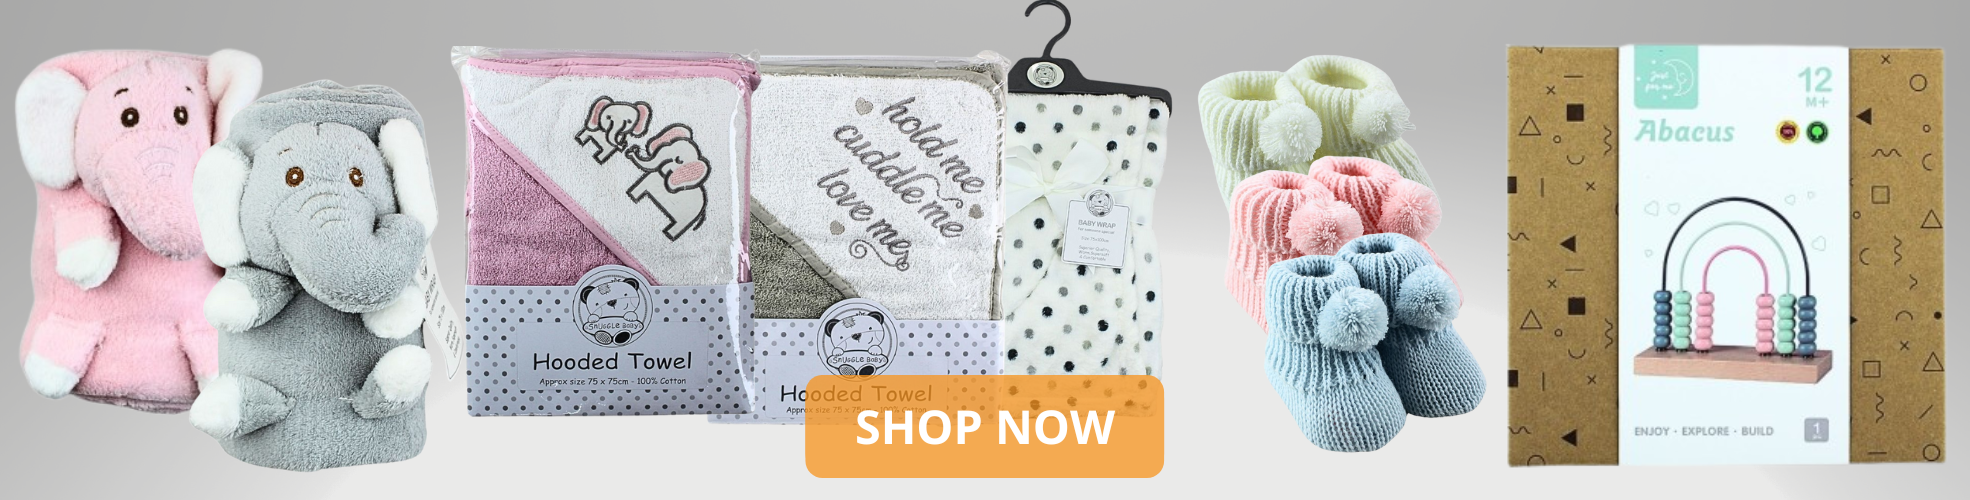 Explore our new range of baby products and nursery essentials at wholesale prices. 